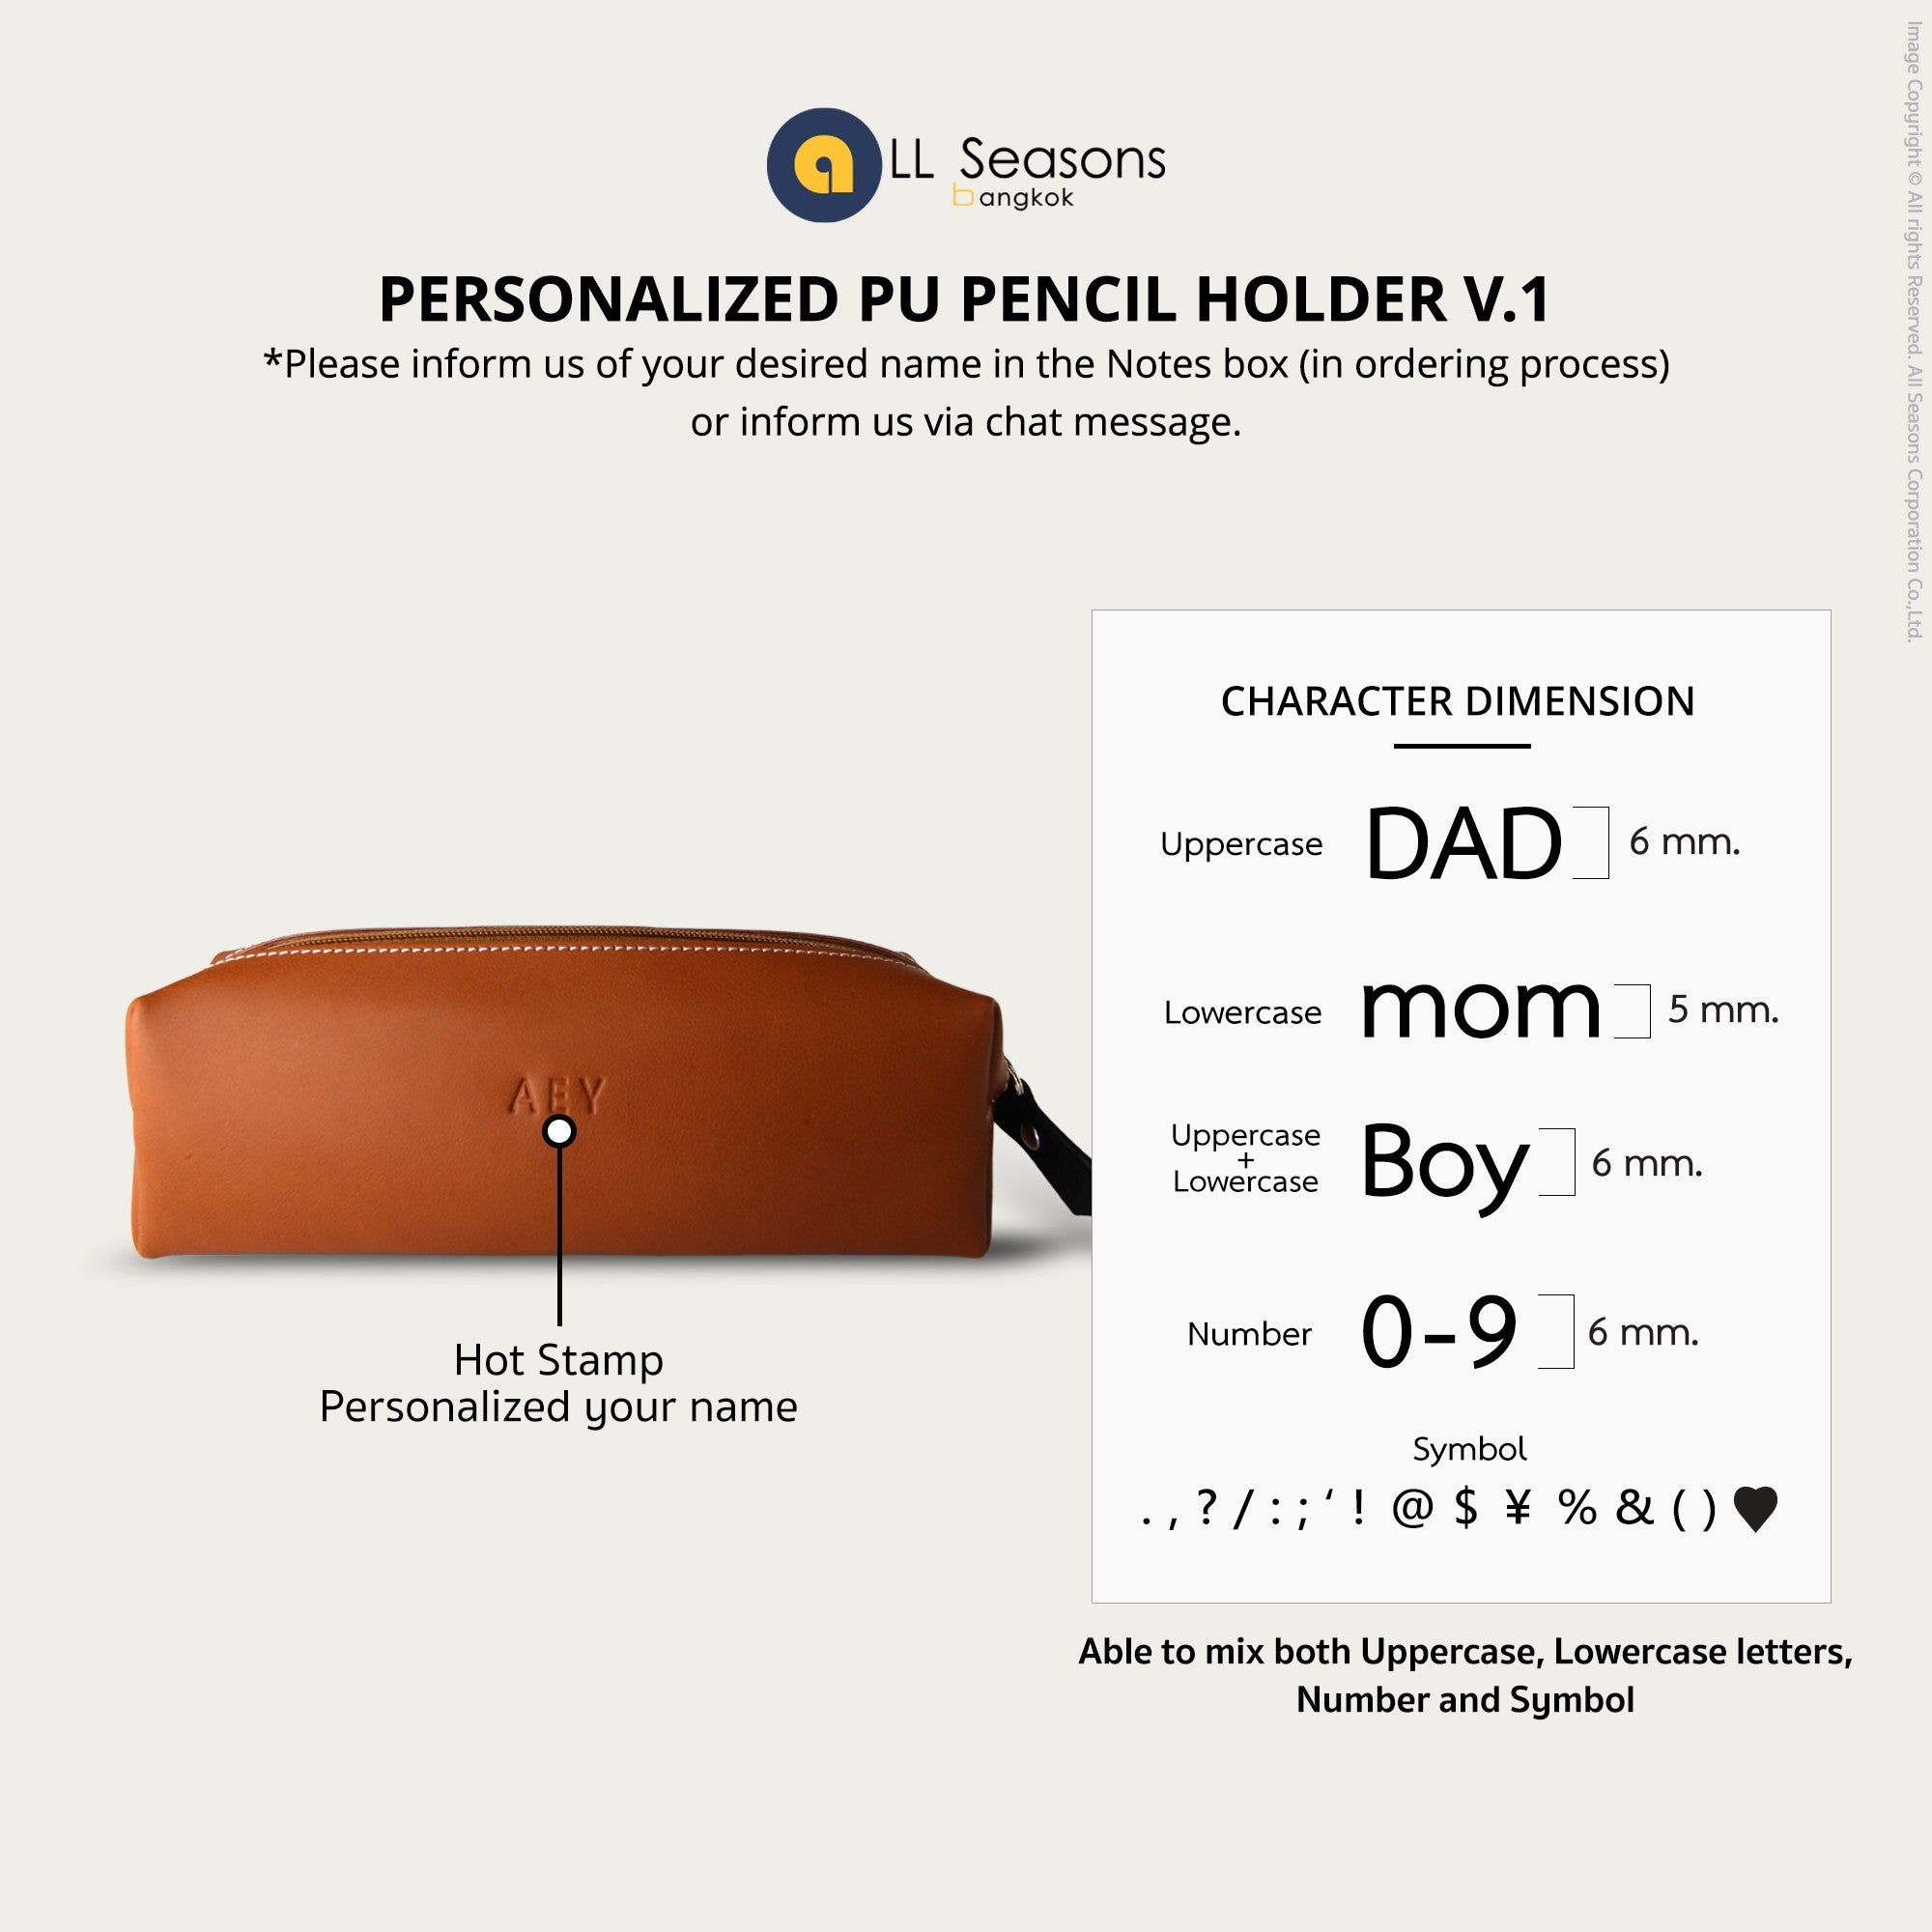 Personalized PU Pencil Holder V.1